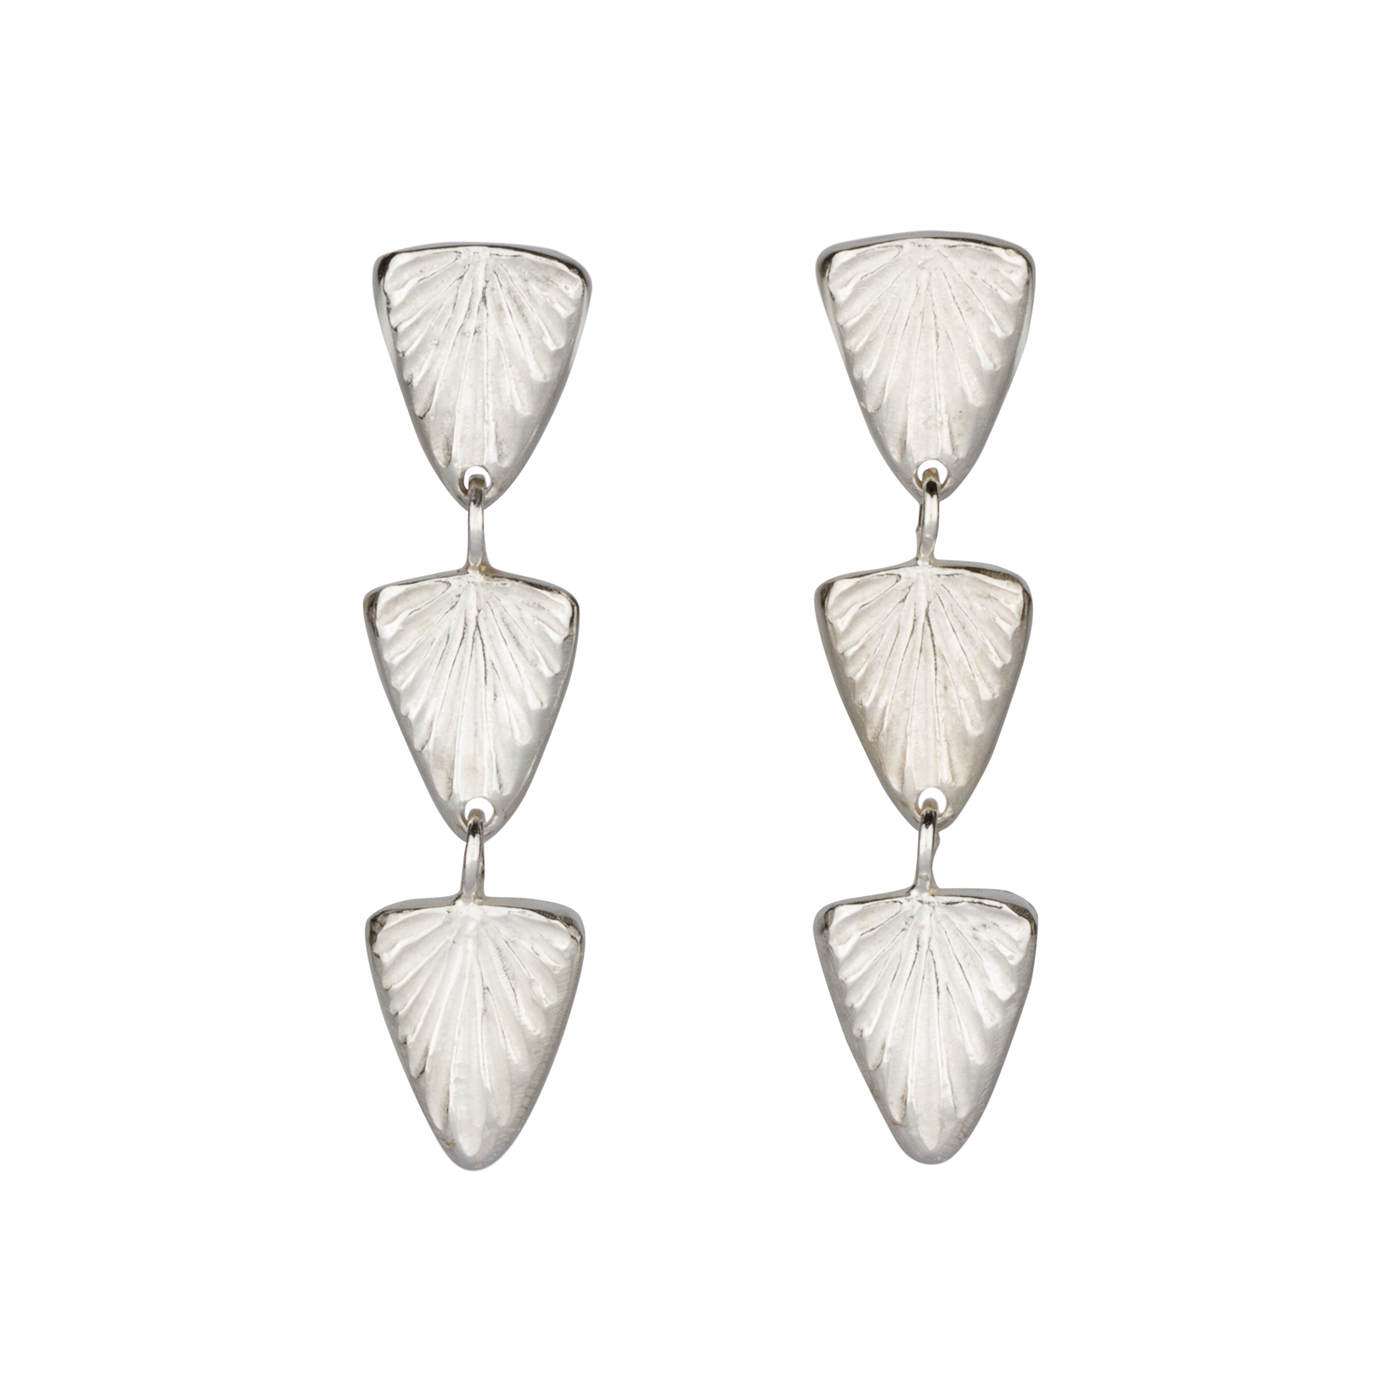 Sterling silver triple drop earrings of cared triangular sparks with post backs on white